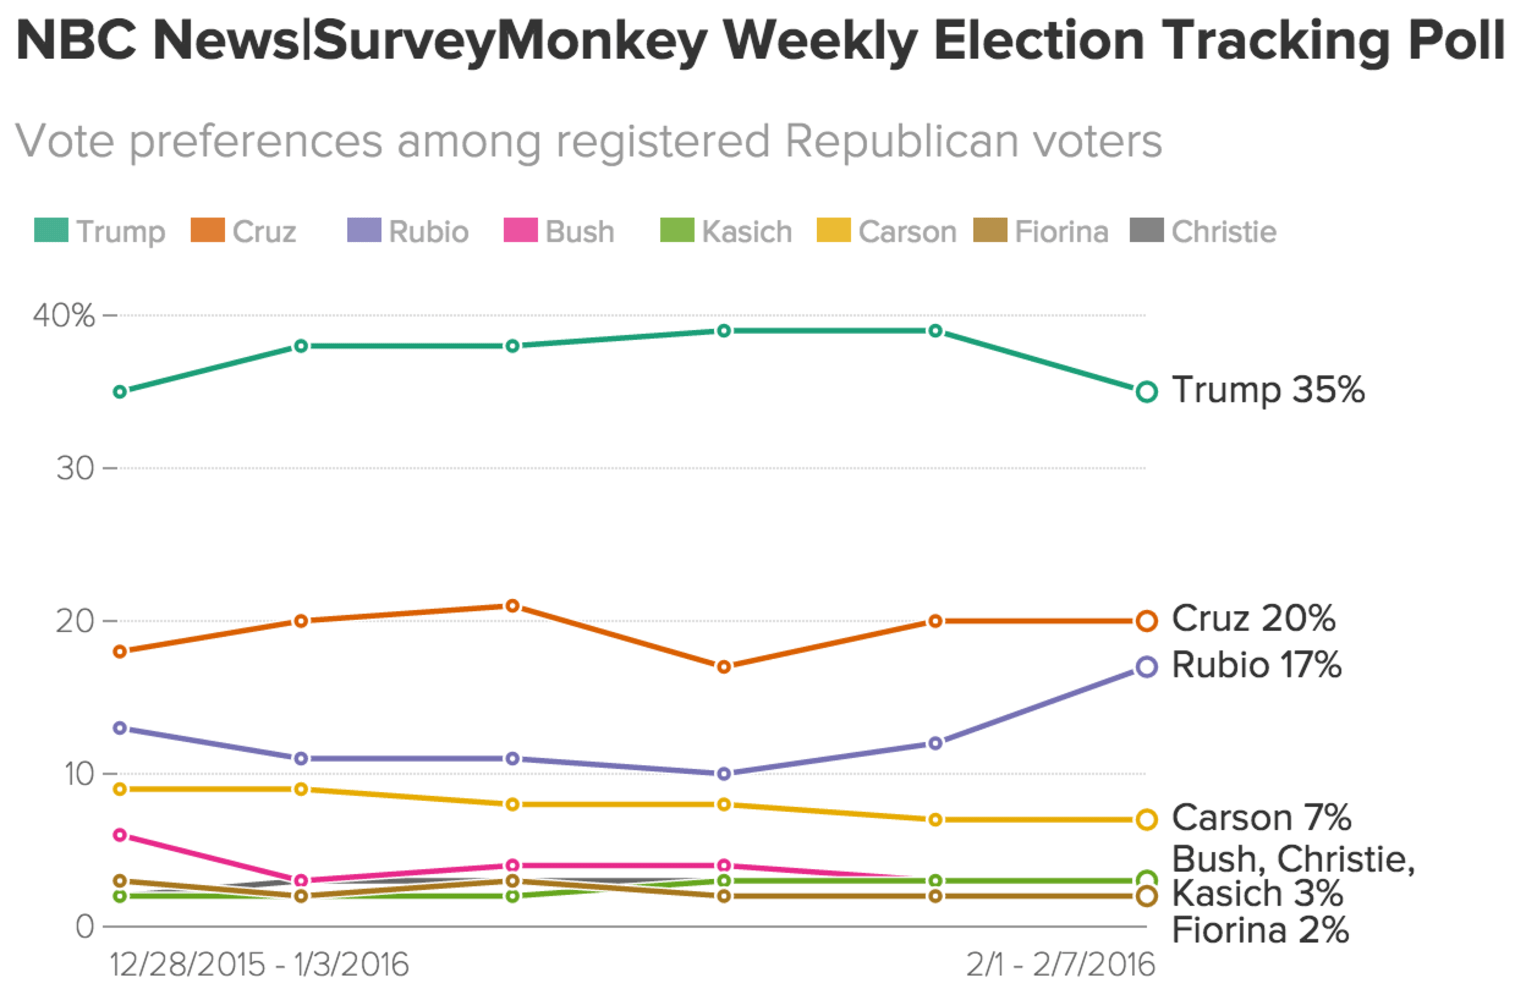 Voters Think Trump Will Win GOP Nomination, But Cruz & Rubio on the Rise: Poll - NBC News